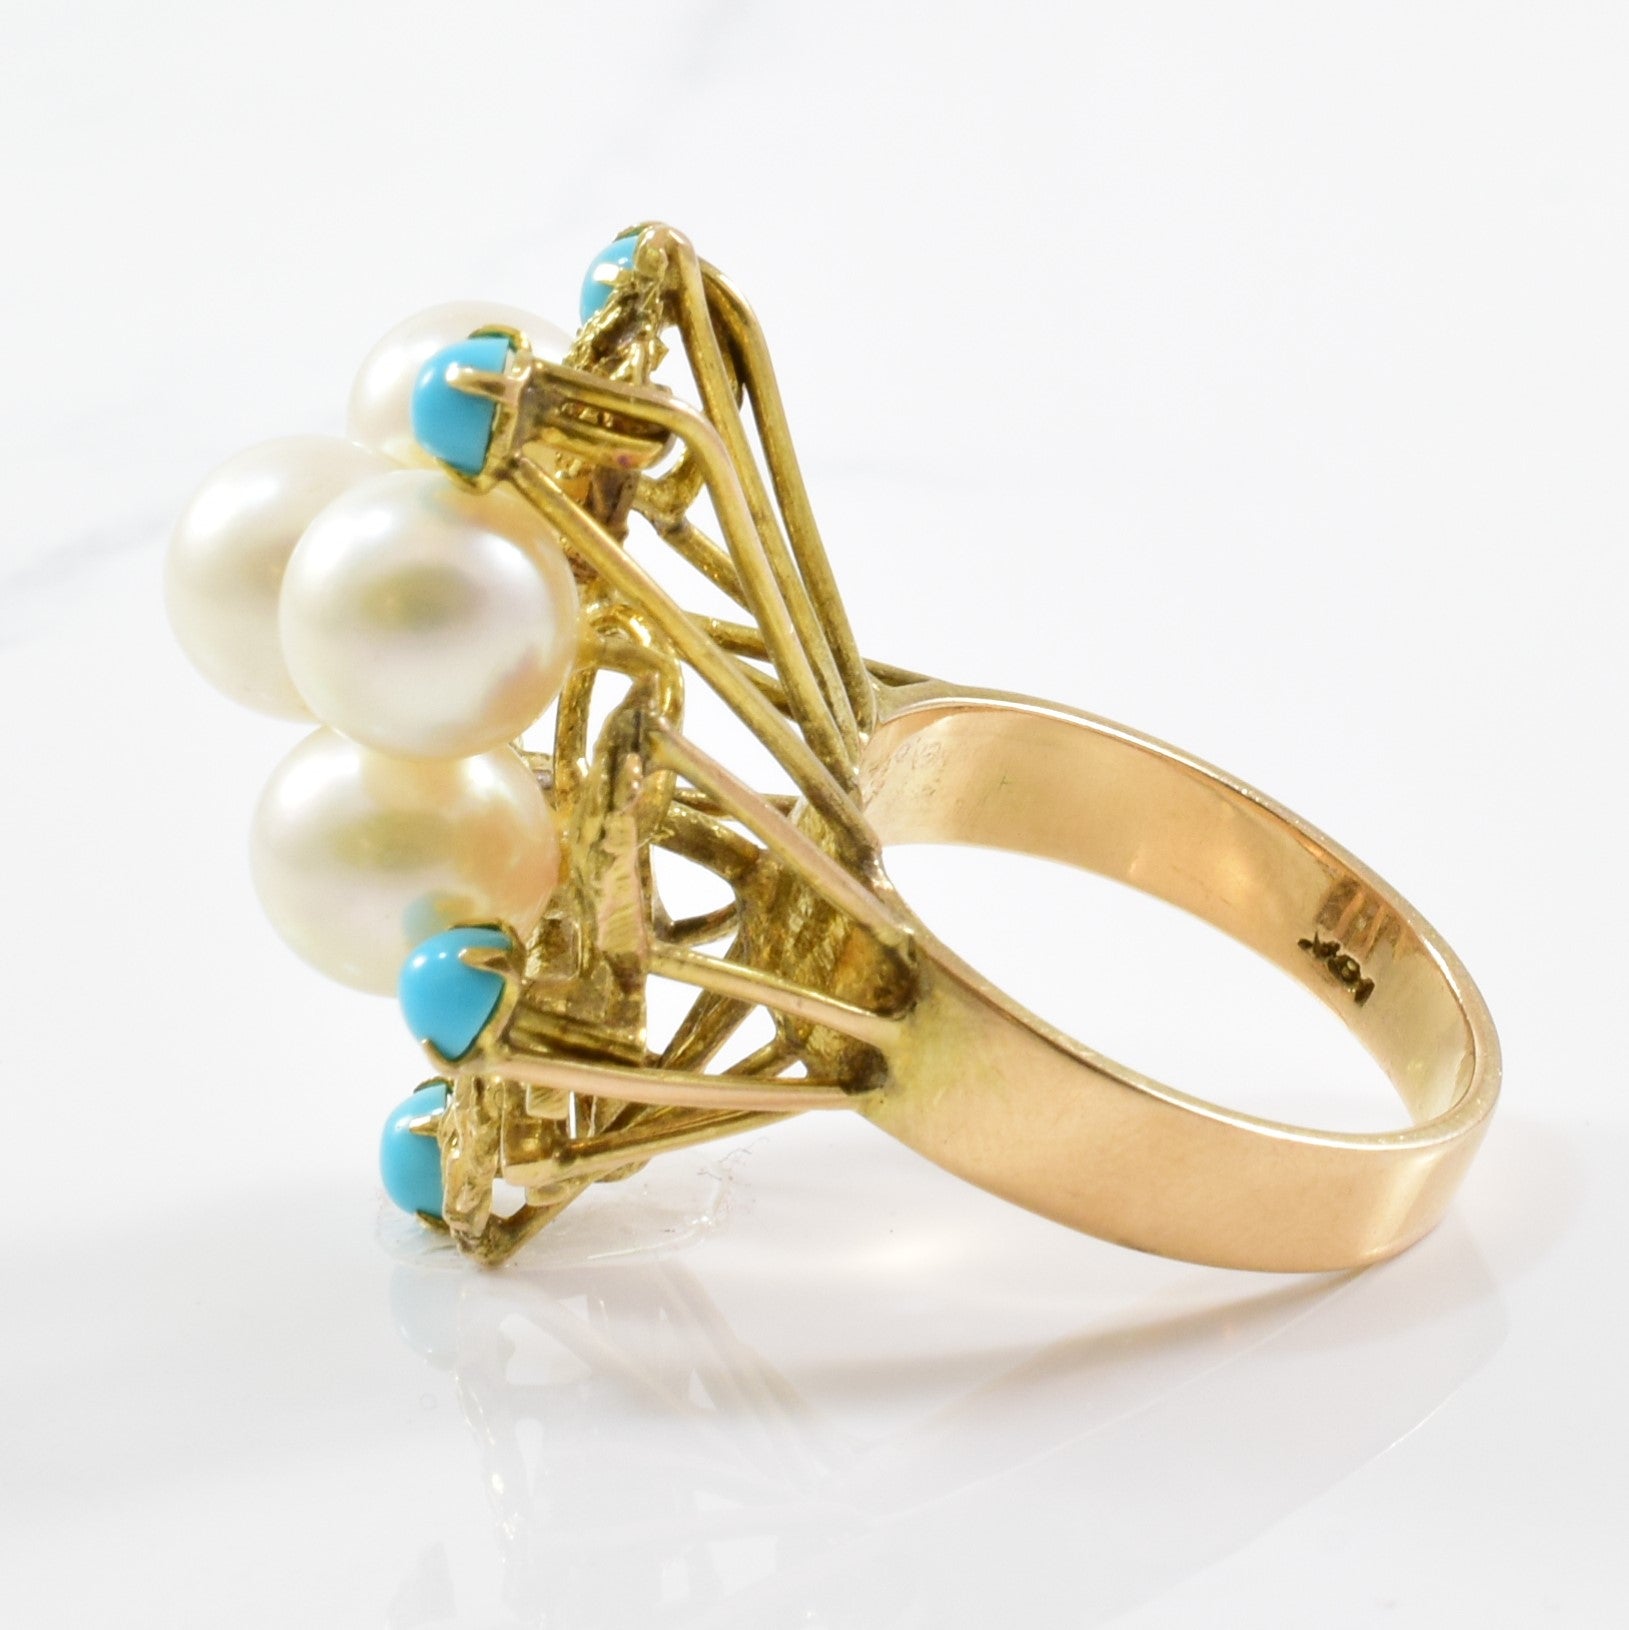 High Set Pearl & Turquoise Ring | SZ 7.25 |